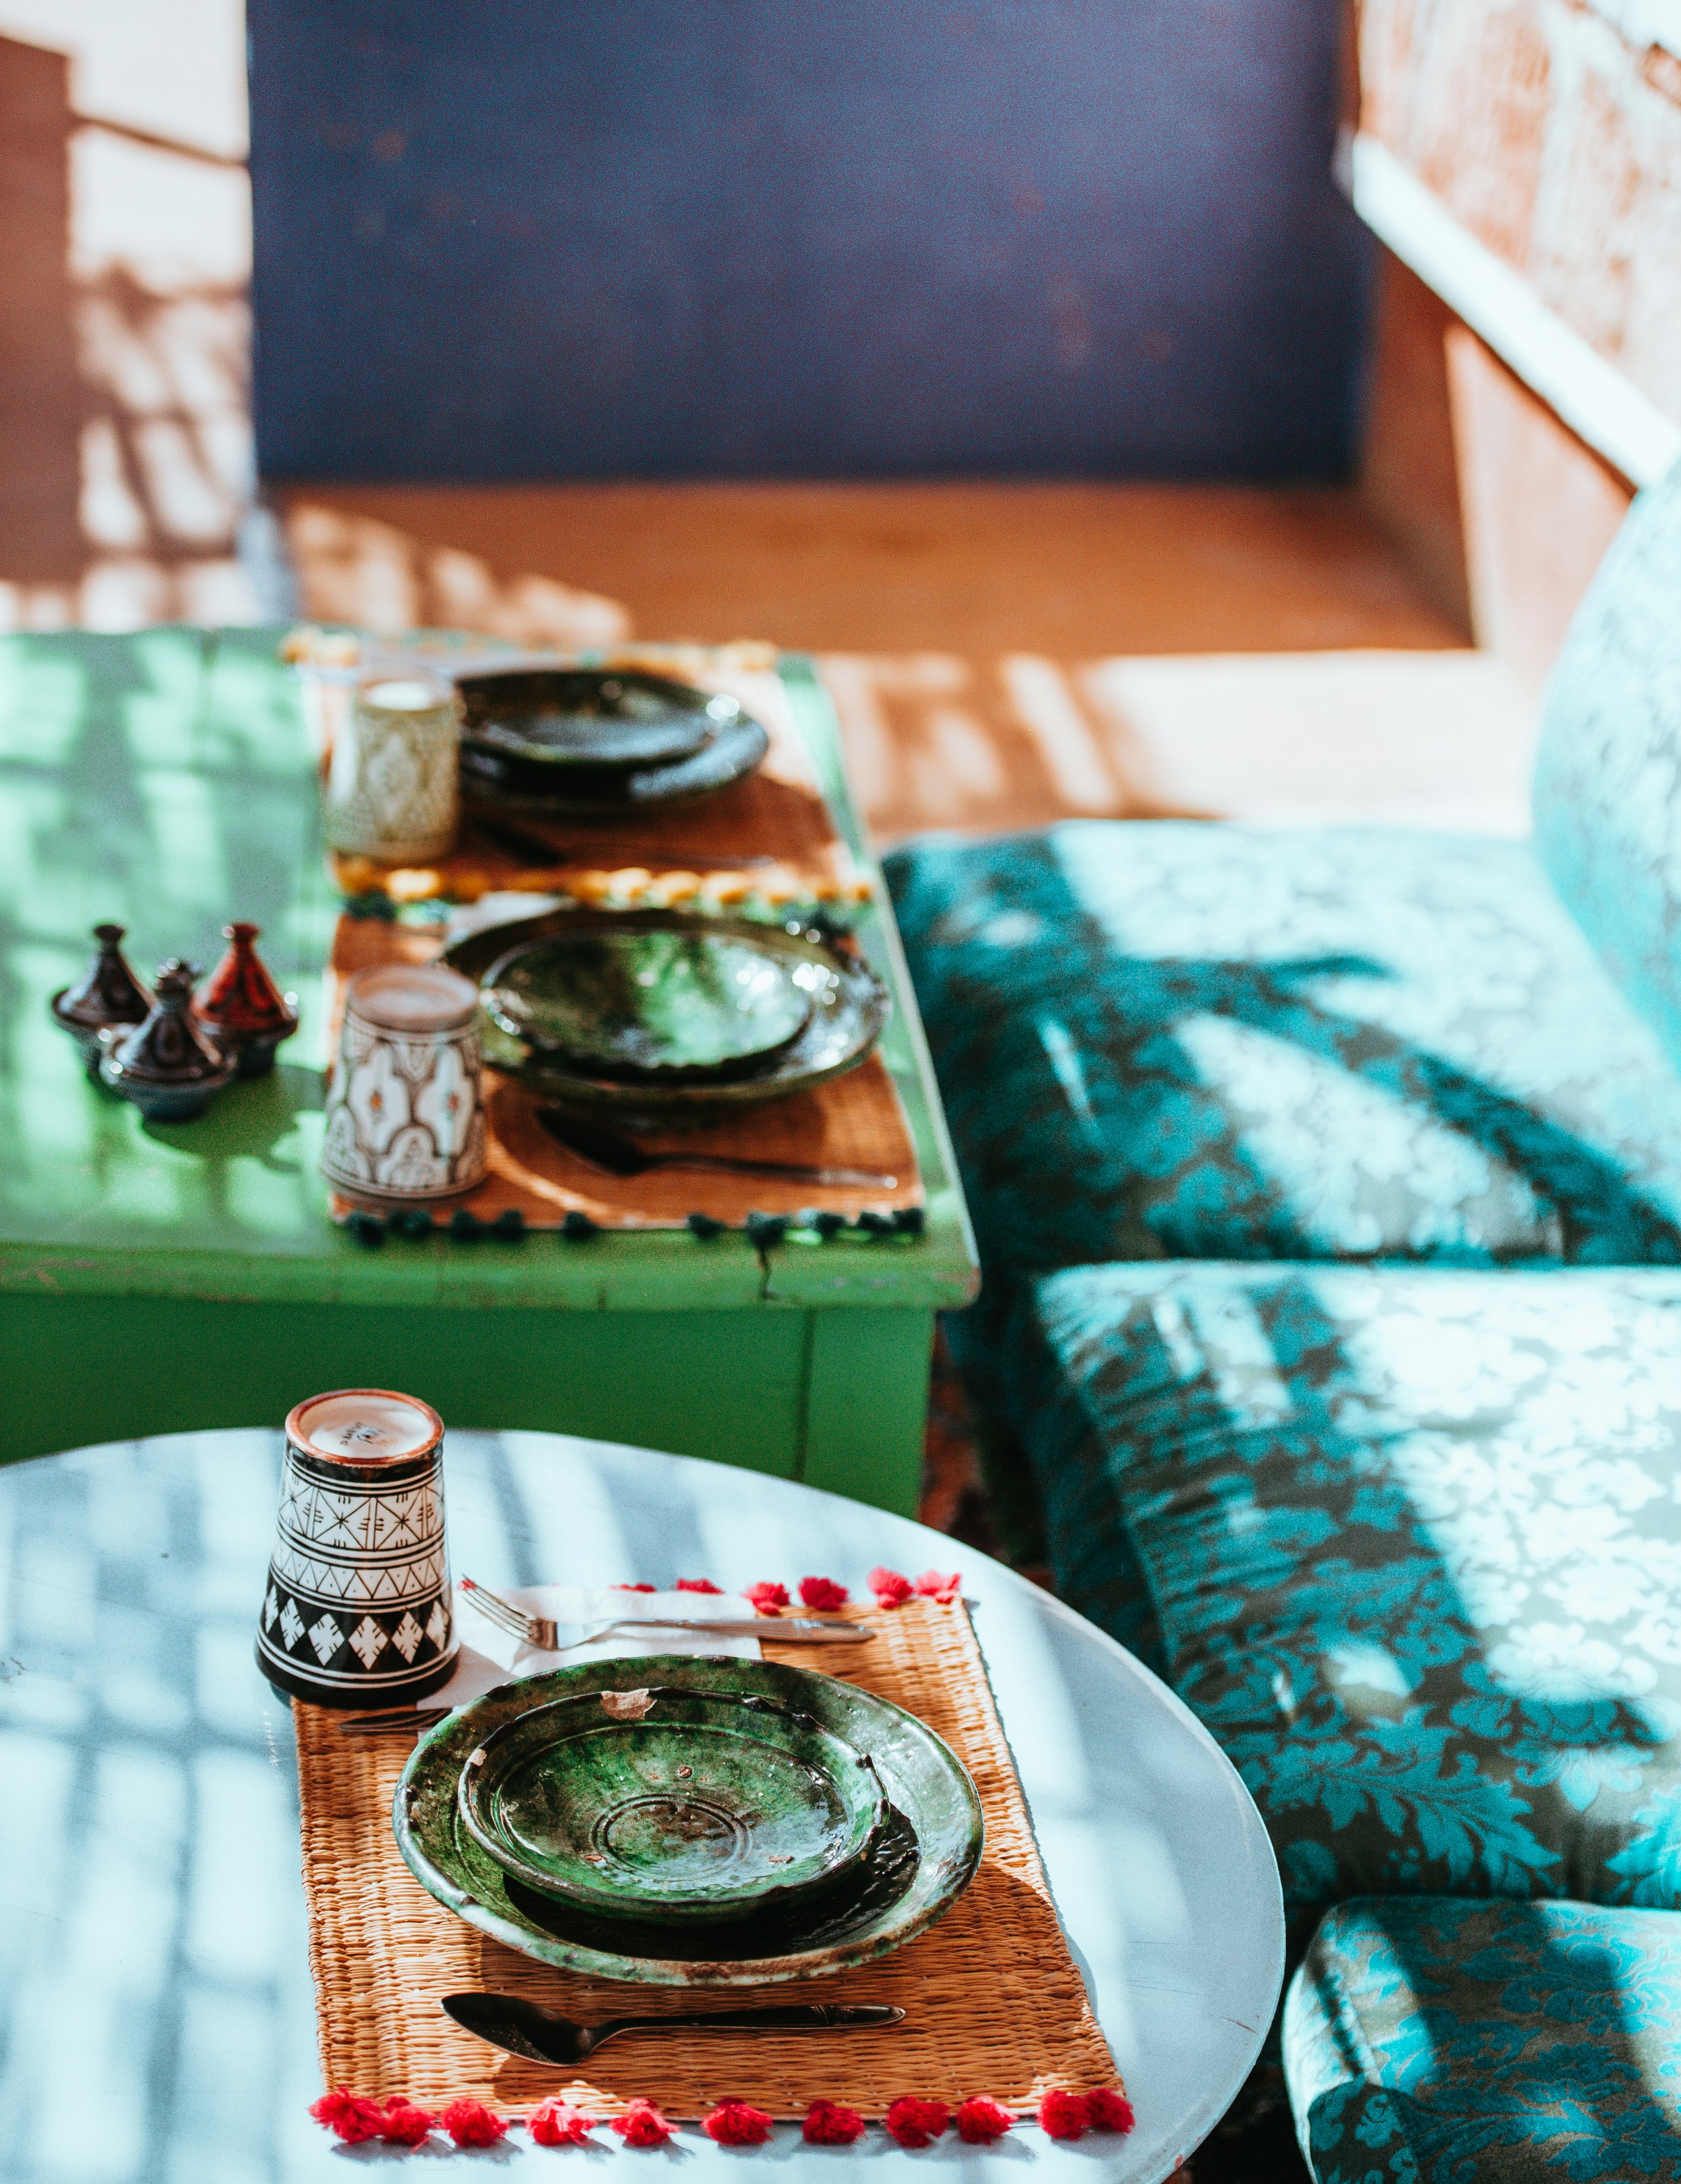 green ceramic bowl and plate on table